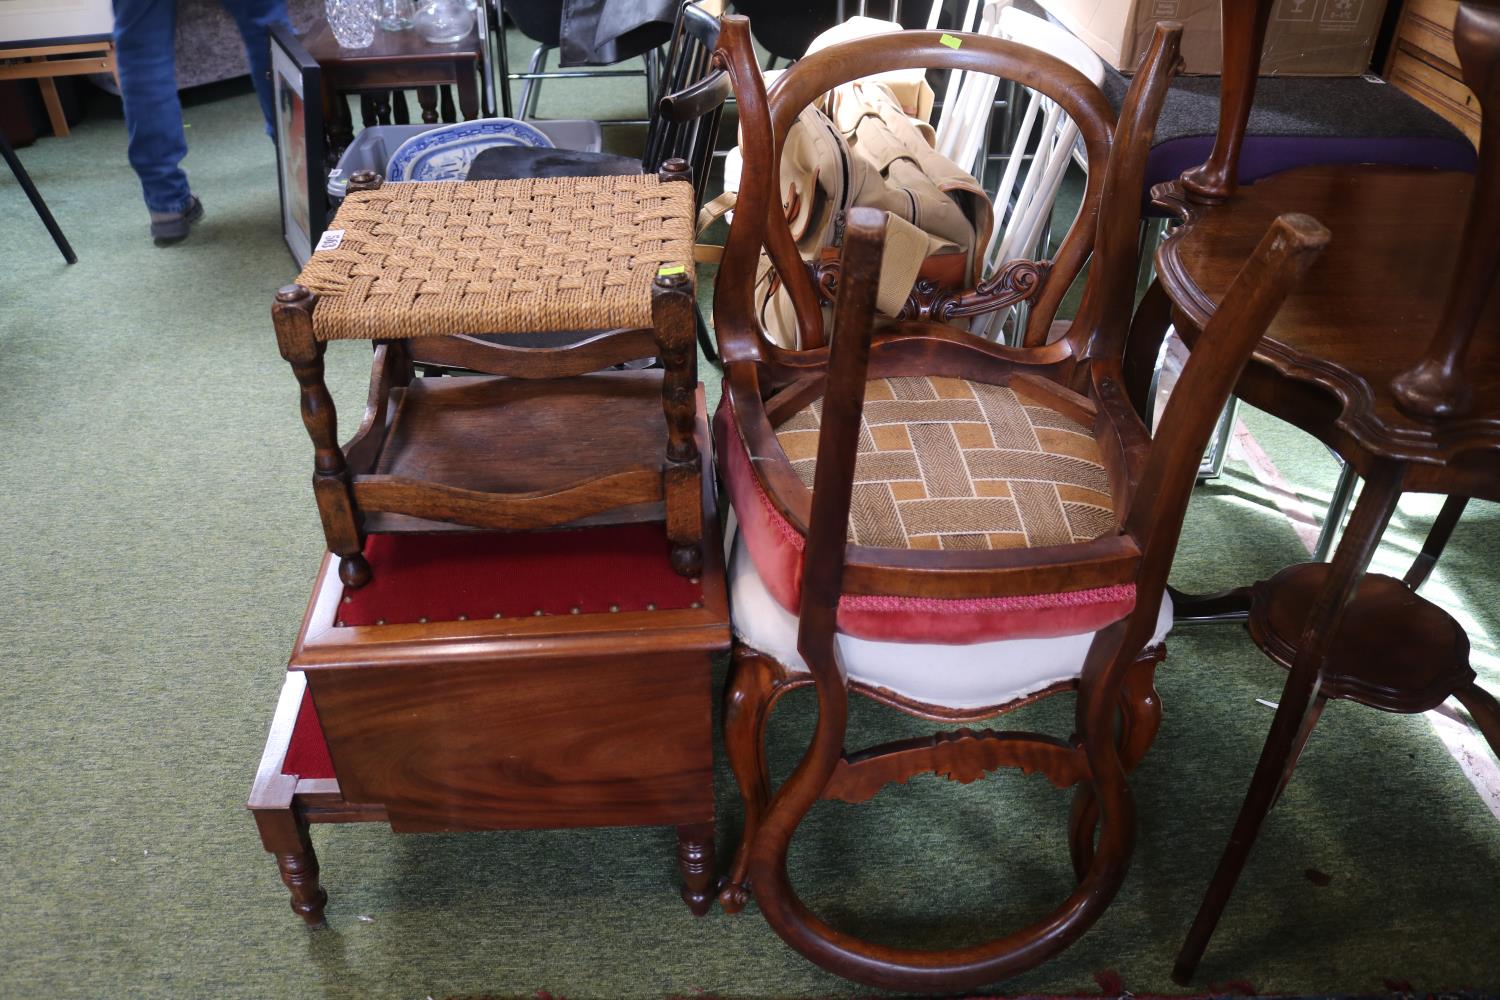 Pair of upholstered Balloon back chairs, Seagrass stool and a Mahogany commode